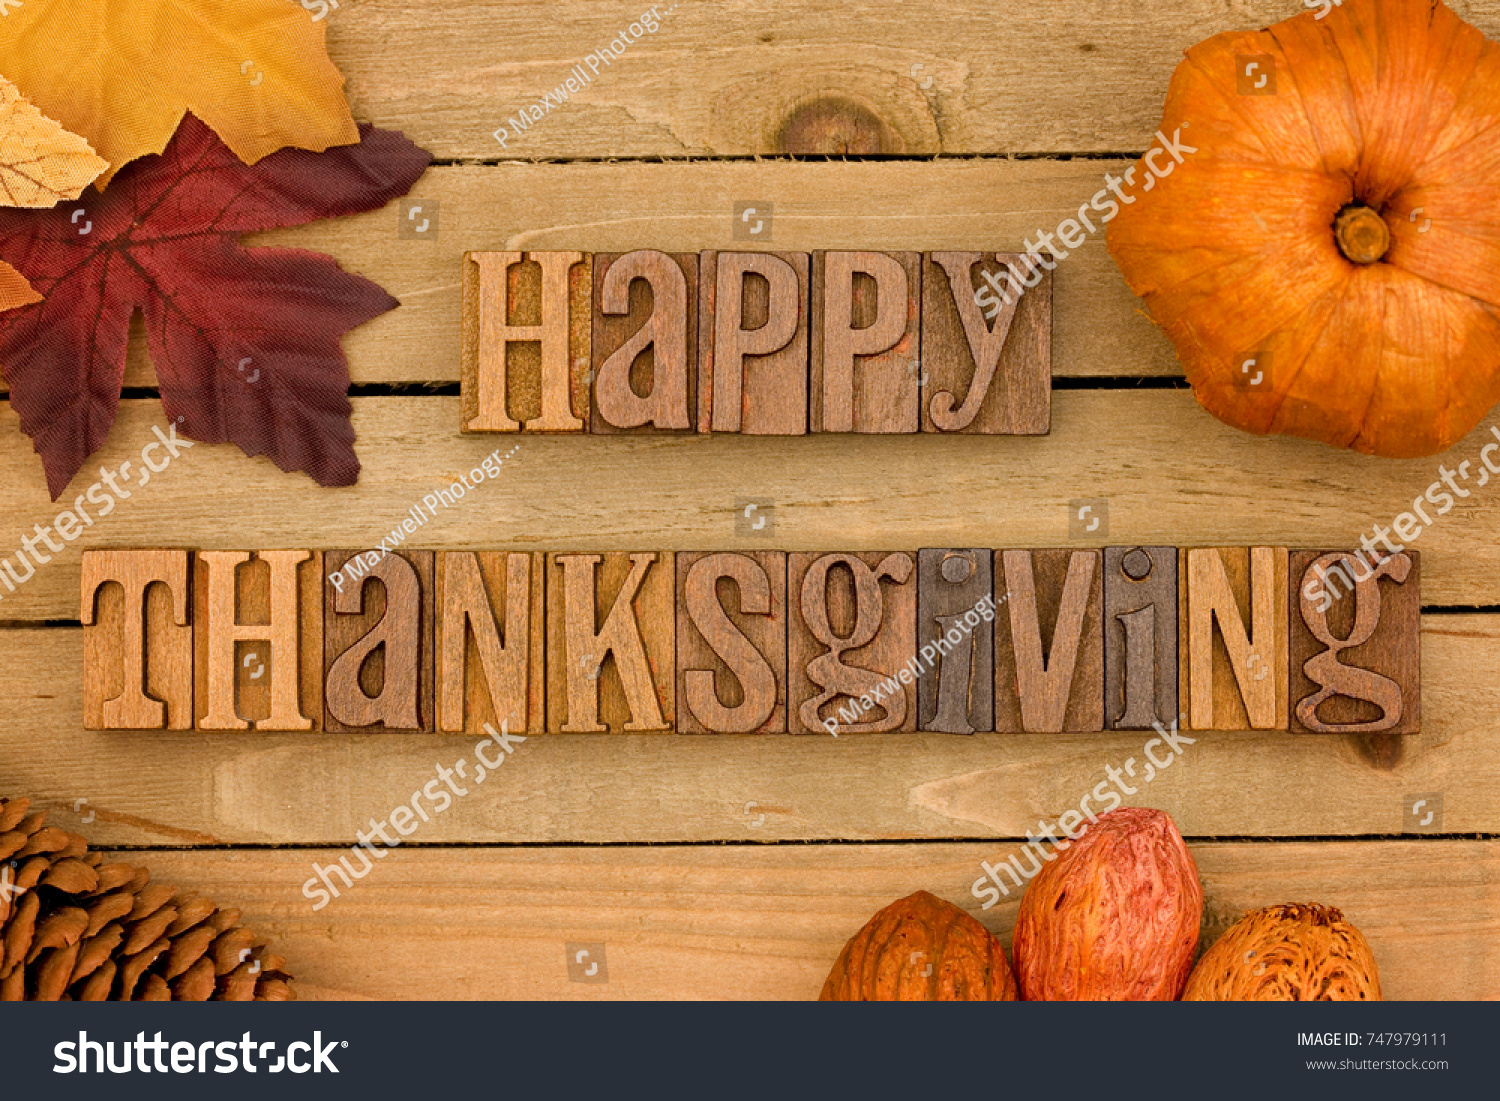 Thanksgiving Themed Background on a Wooden Board #747979111